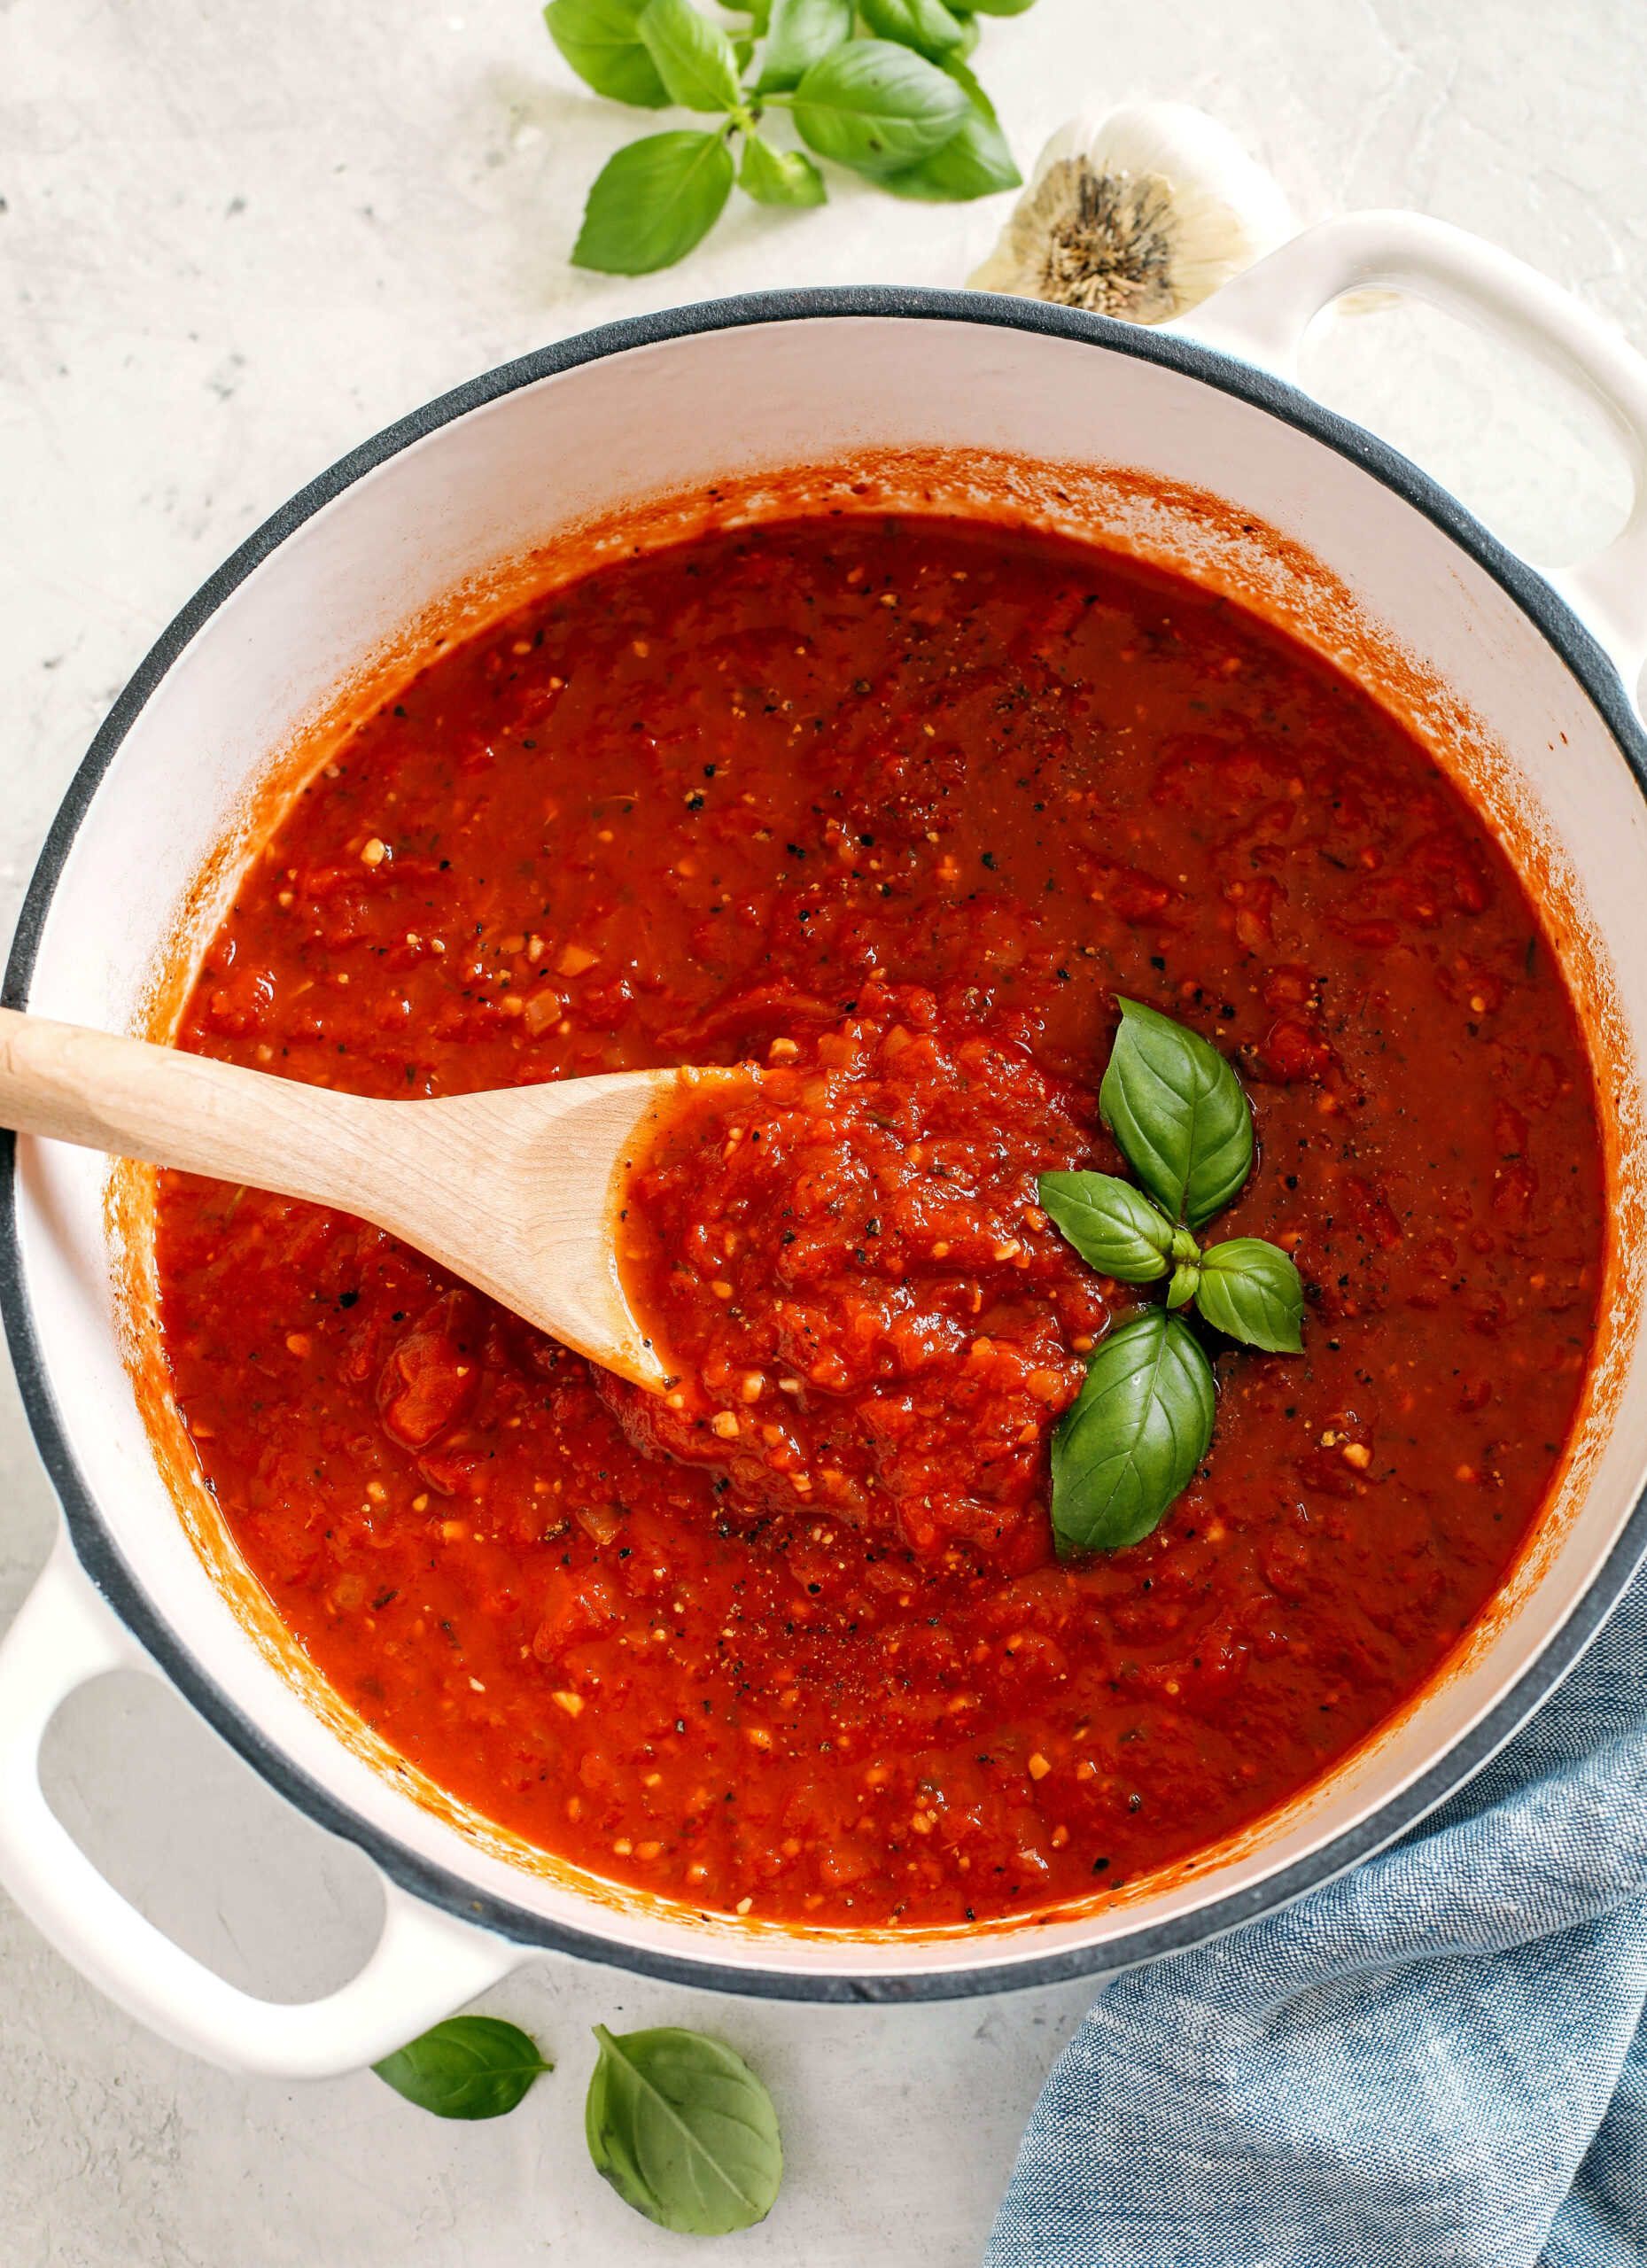 The most delicious homemade Simple Marinara Sauce made with San Marzano tomatoes, garlic, shallots and herbs. This is a family favorite and one I KNOW you’ll make time and time again!